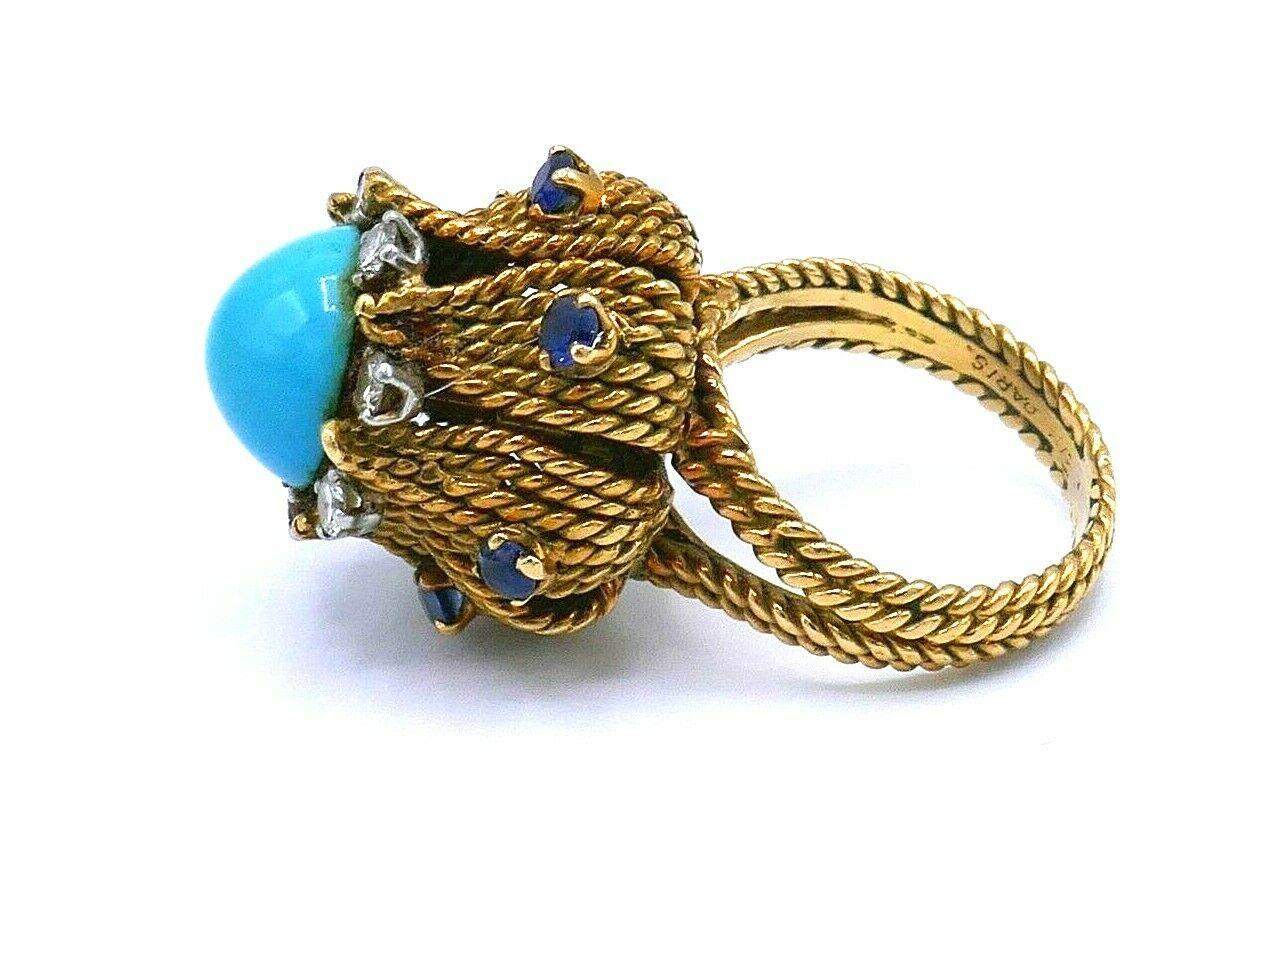 Spectacular antique ring made of 18k (tested) braided yellow gold featuring turquoise, sapphire and diamond. Total carat weight of the diamonds is 0.28 pts. 
Stamped with a serial number and a place of origin (Paris). 
Measurements: the ring size is